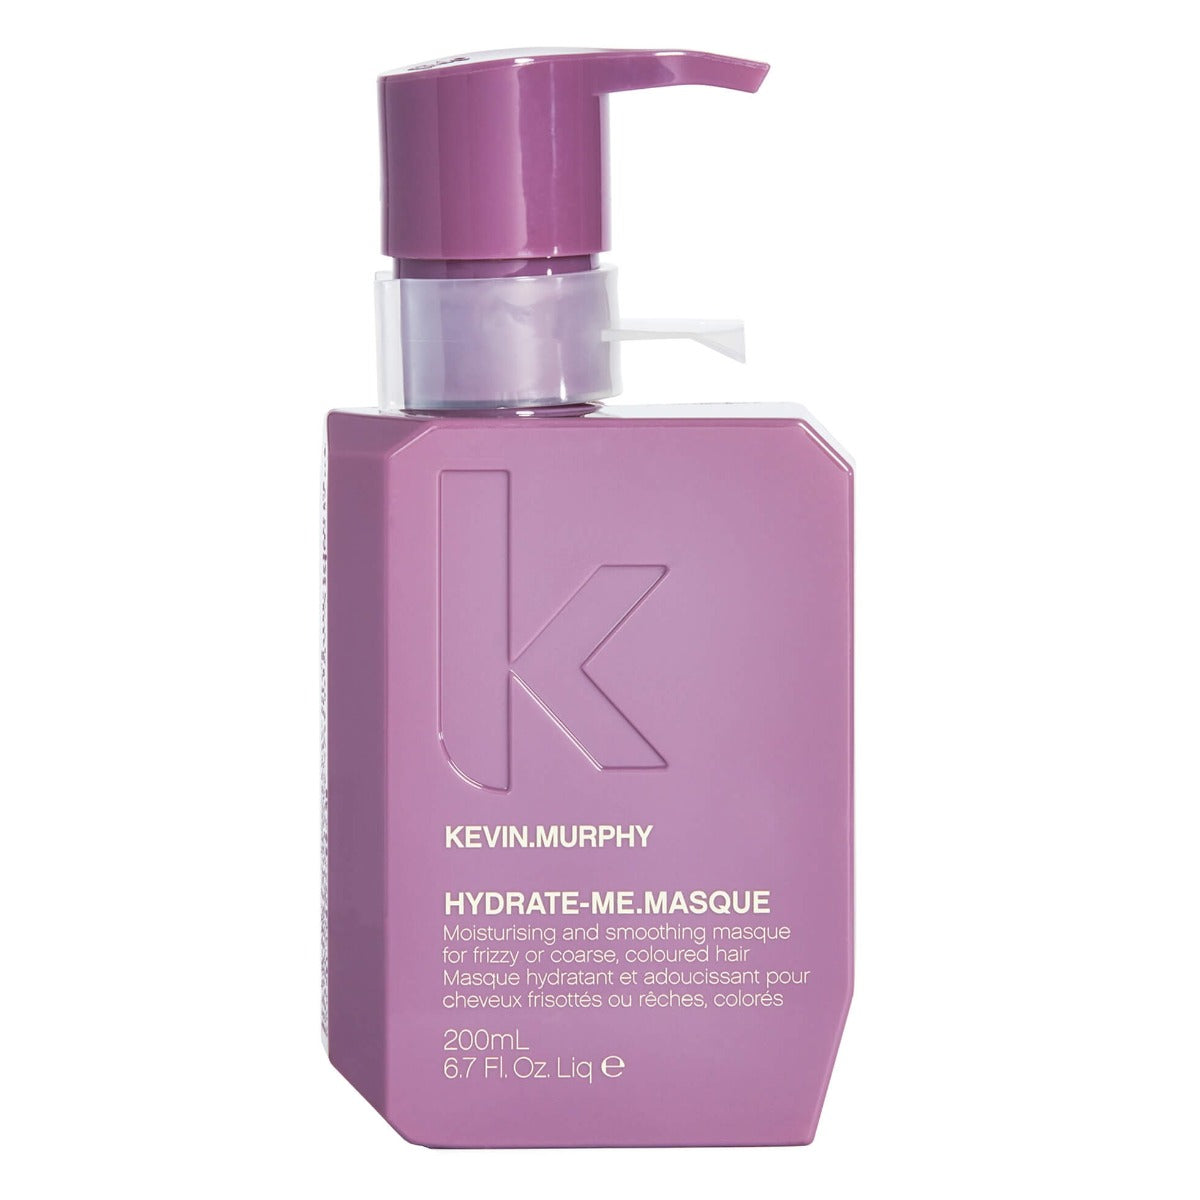 Are Kevin Murphy Hair Products Worth the Hype?